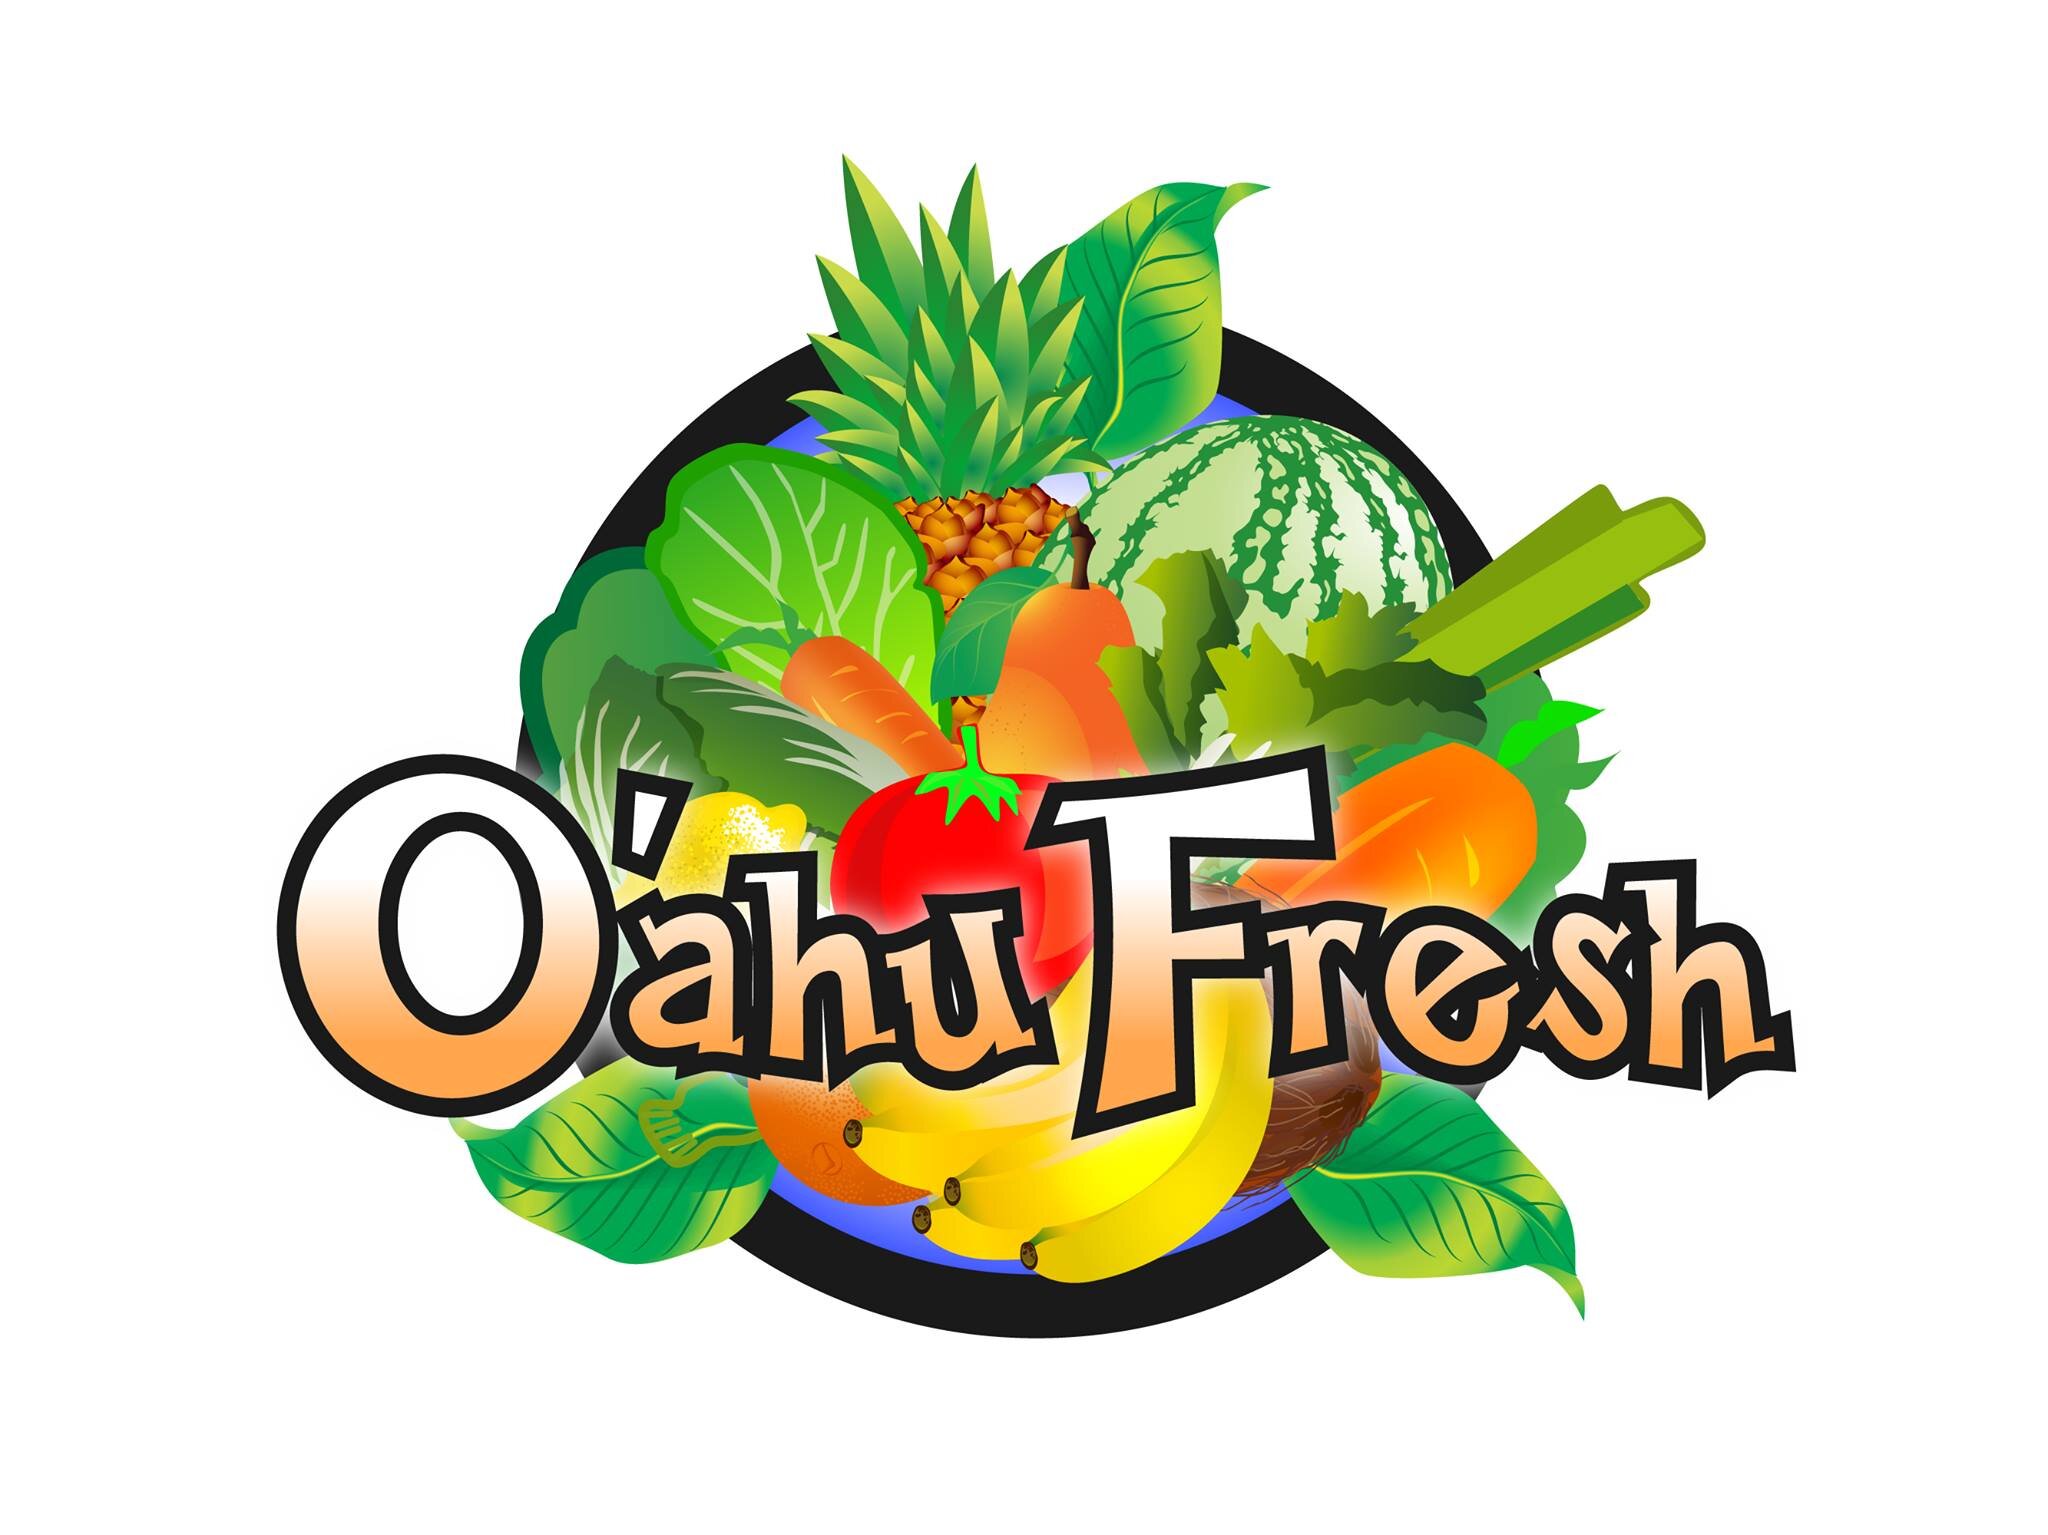 Full Cycle Reusable Takeout Container Program in O'ahu